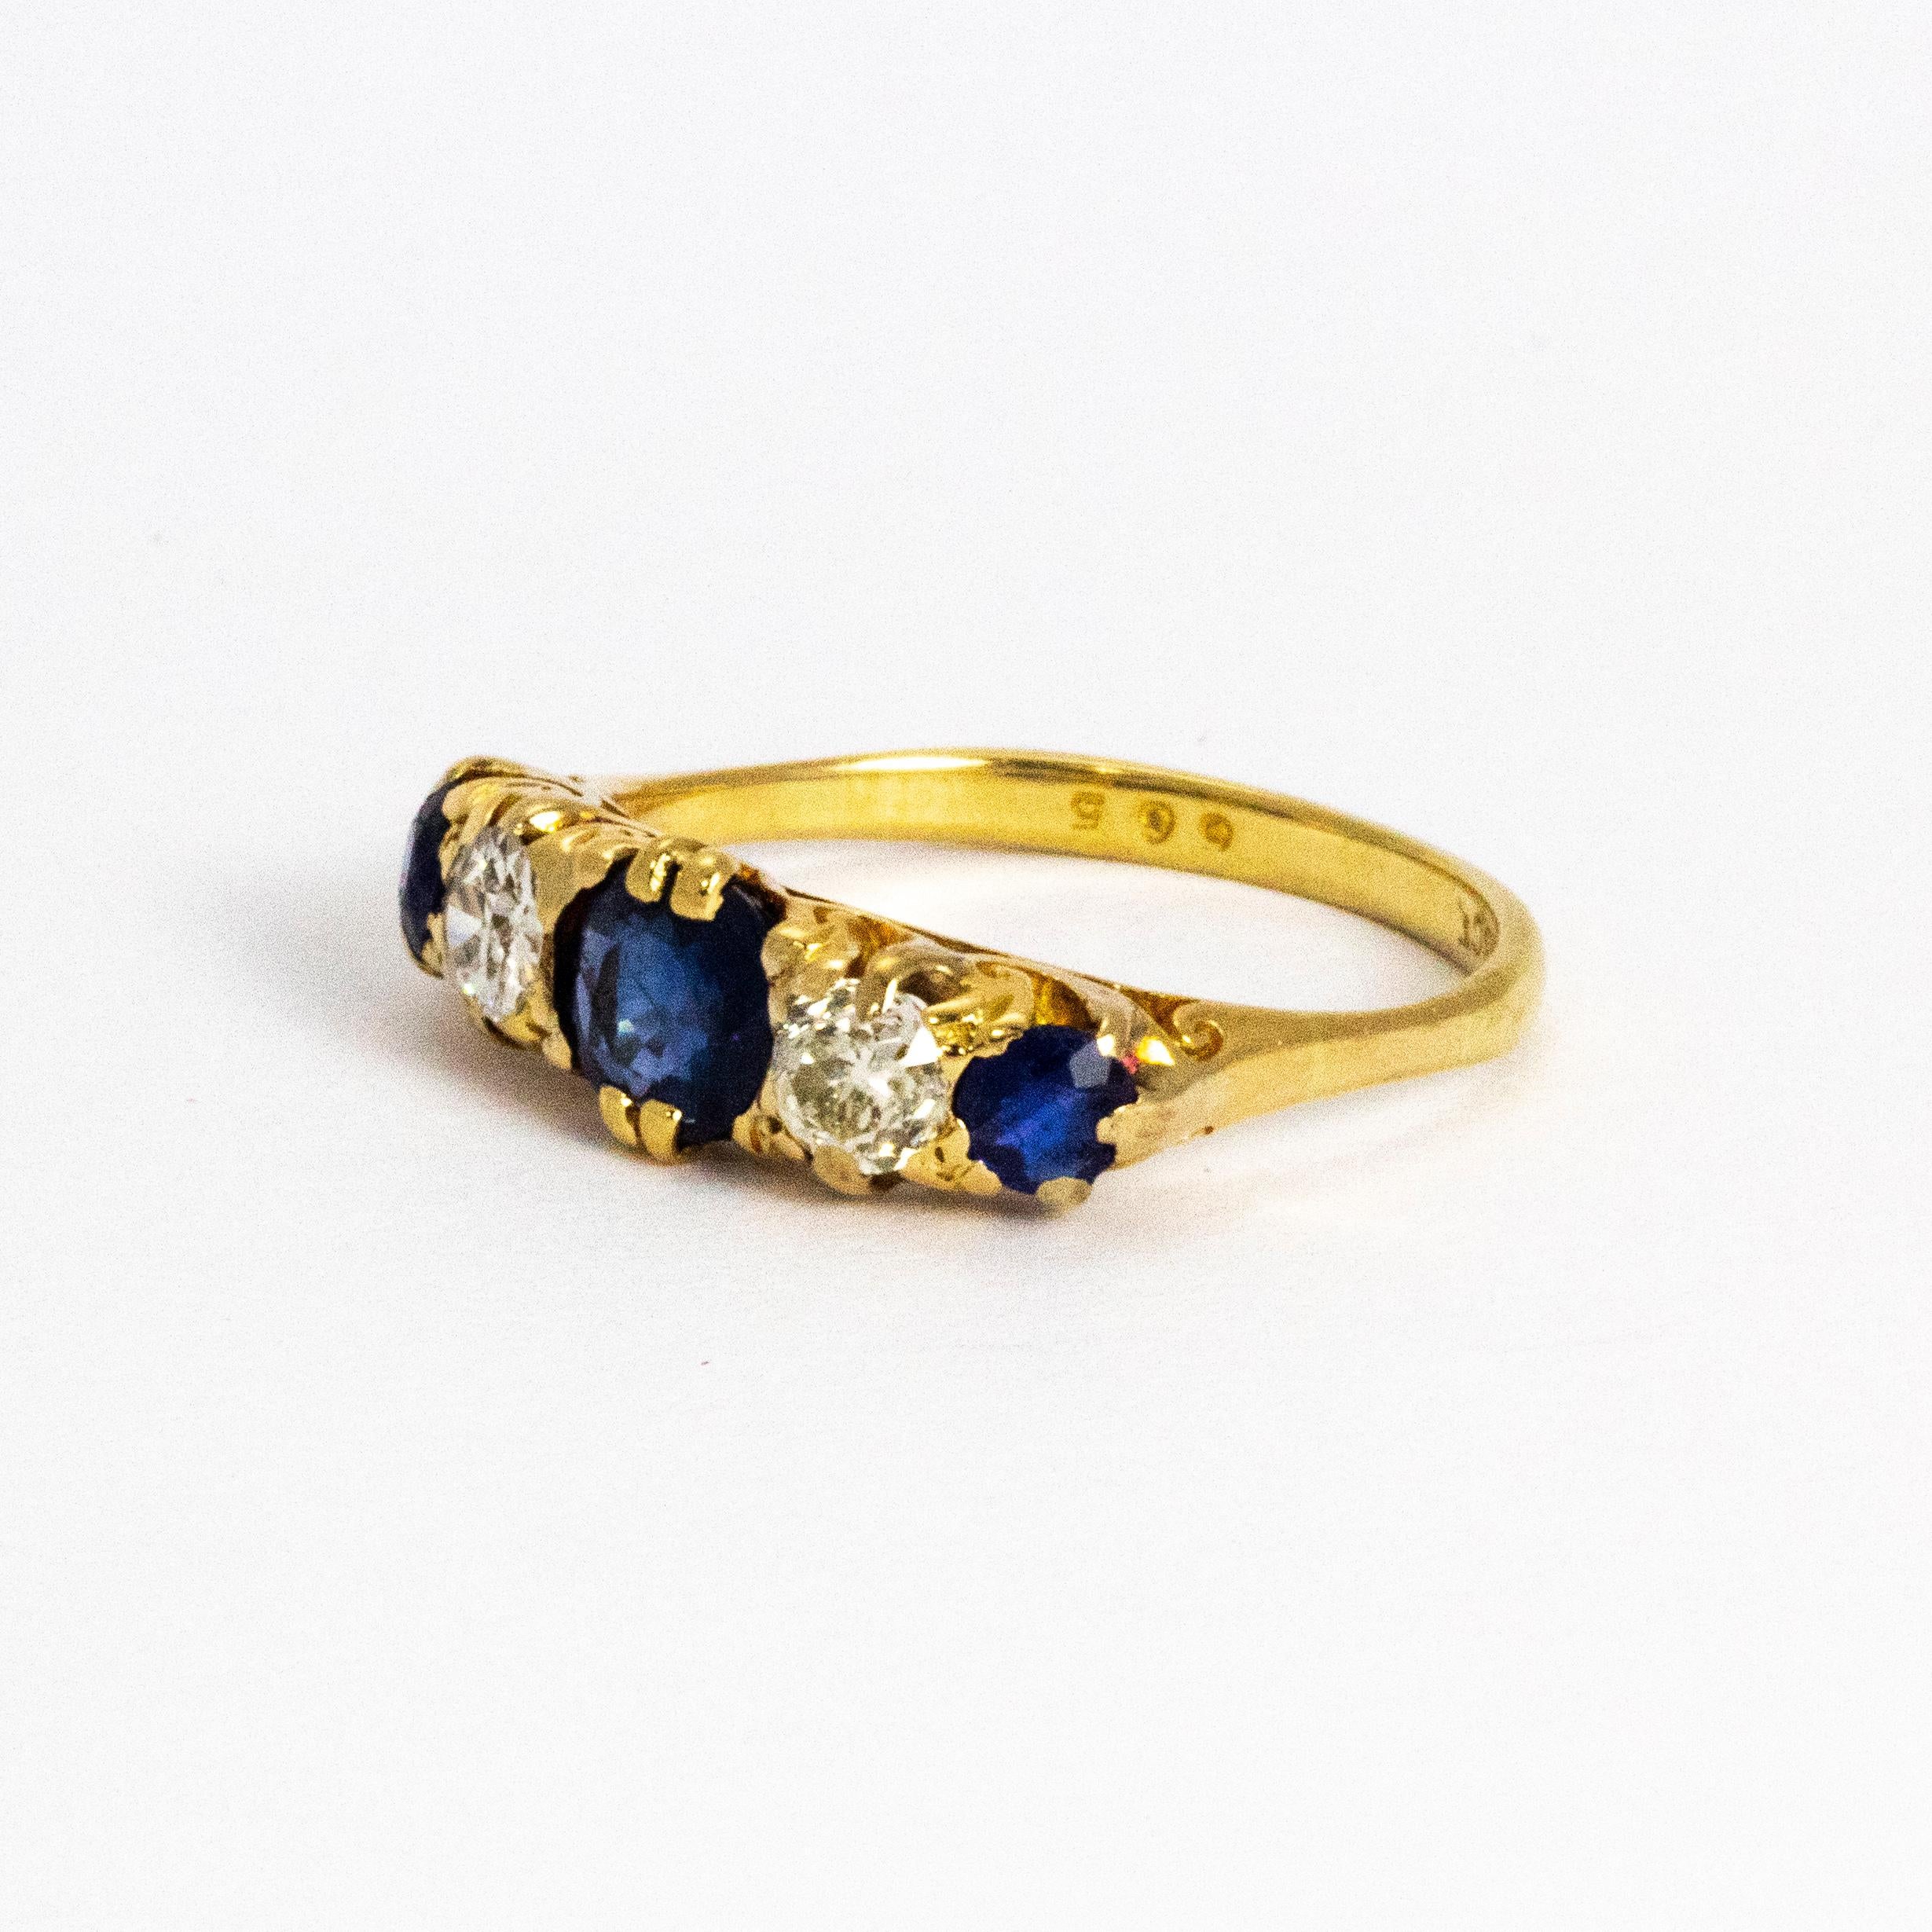 This sparkling ring boasts a beautiful blue sapphire central stone measuring approximately 65pts, two old cuts diamonds either side measuring approximately 20pts each and two smaller sapphires on the outer edge. The setting has beautiful scroll